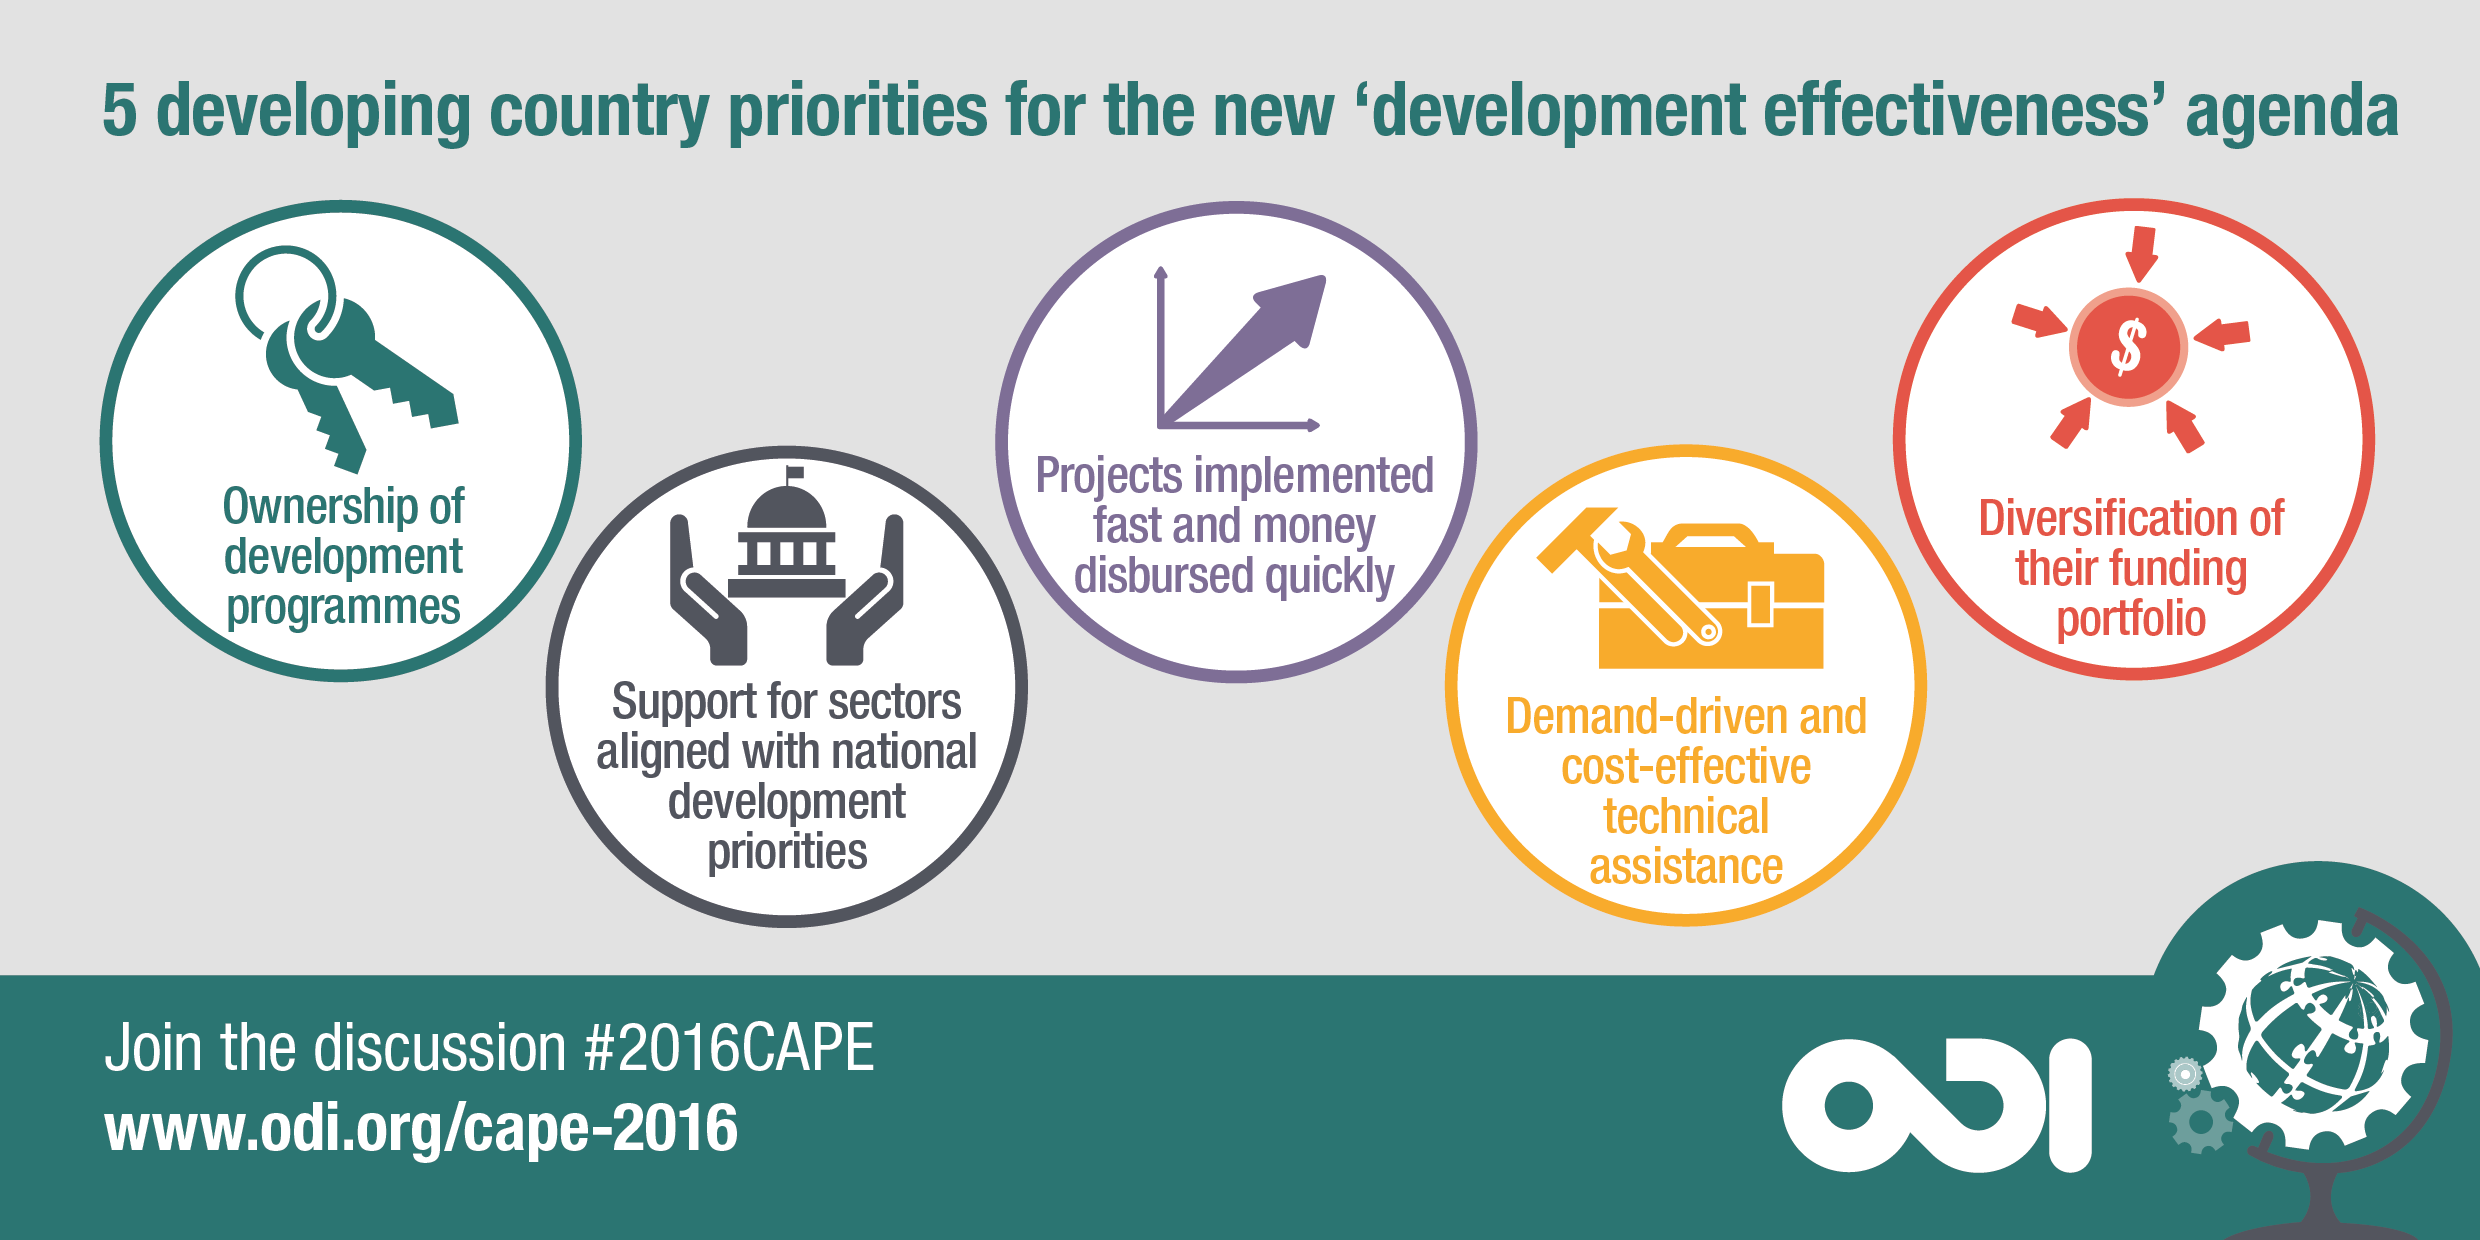 5 developing country priorities for the new 'development effectiveness' agenda